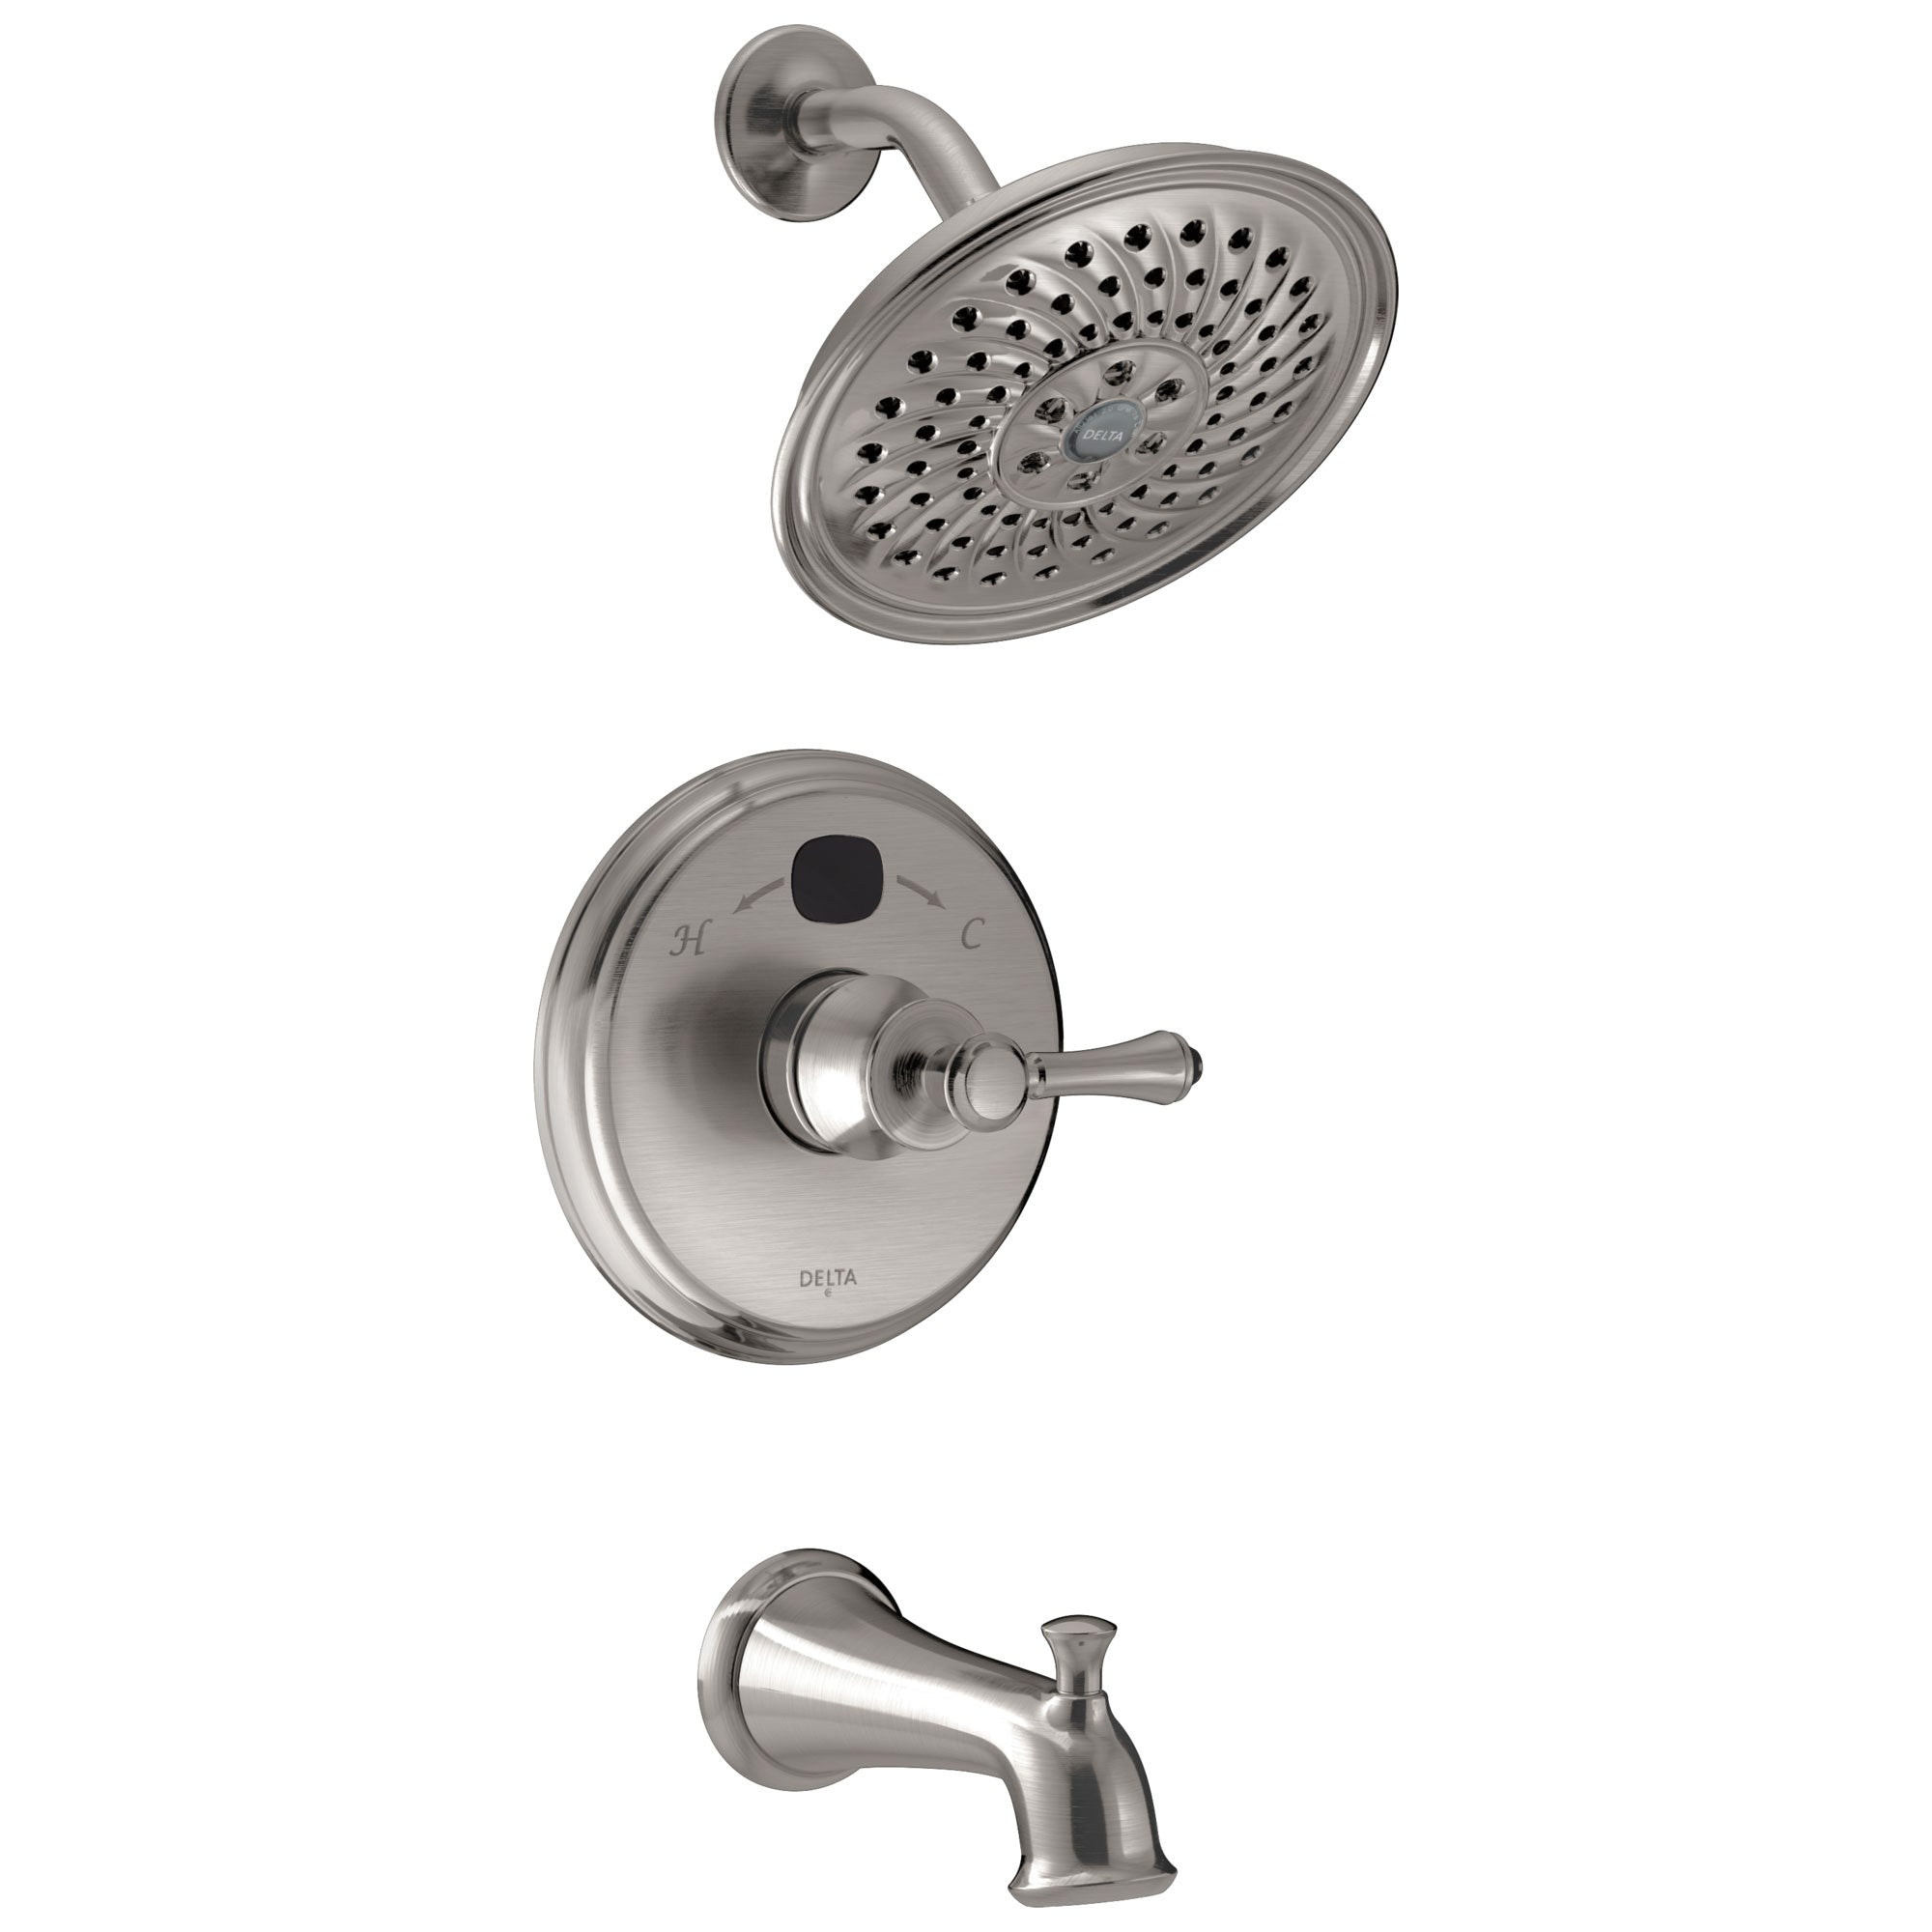 Delta Stainless Steel Finish Traditional 14 Series Digital Display Temp2O One Handle Tub and Shower Combination Faucet Includes Trim Kit and Valve with Stops D2019V